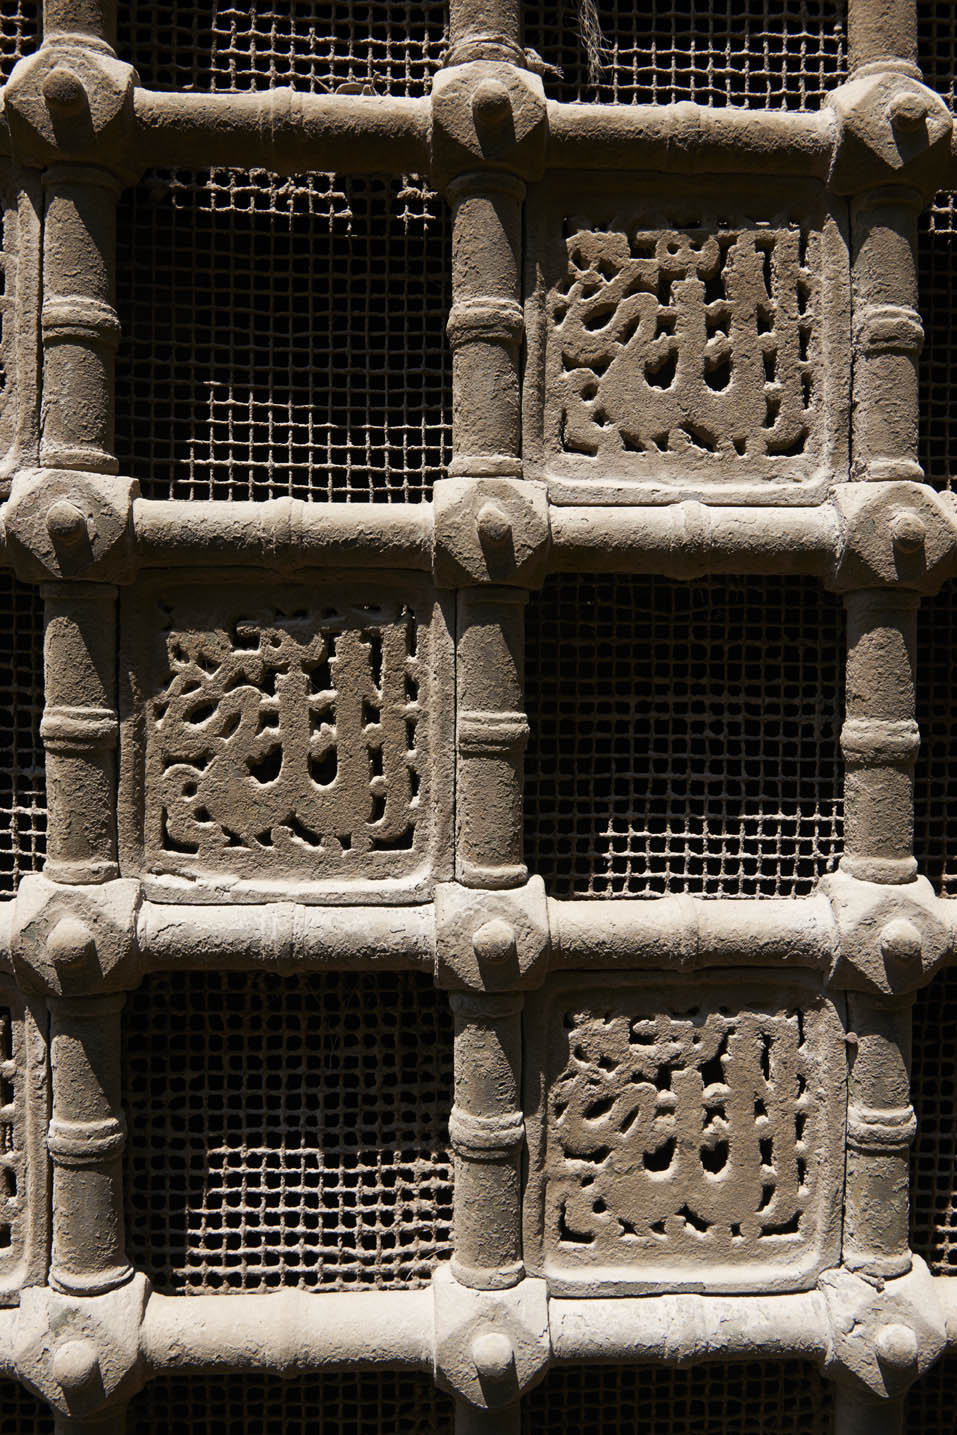 Detail of window grilles, with "Allah" cutout inserts